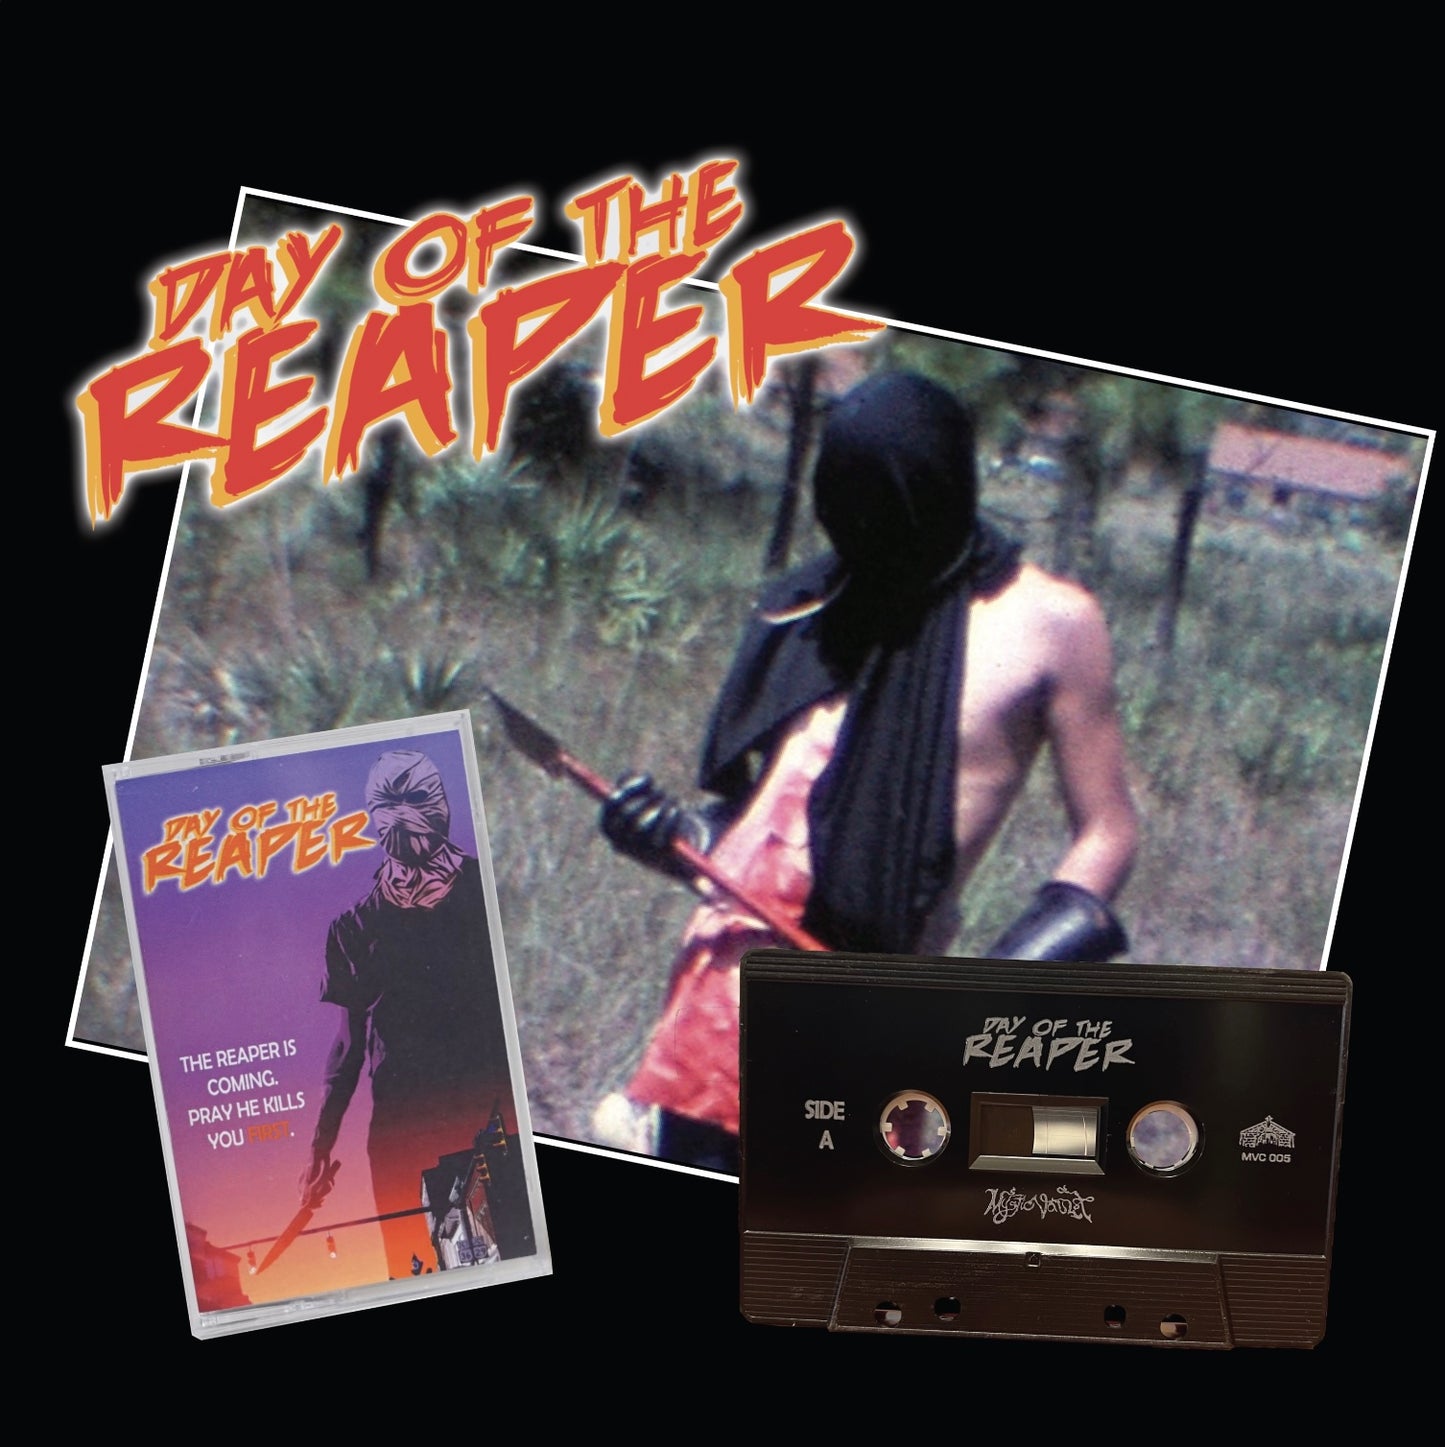 Day of the Reaper soundtrack cassette